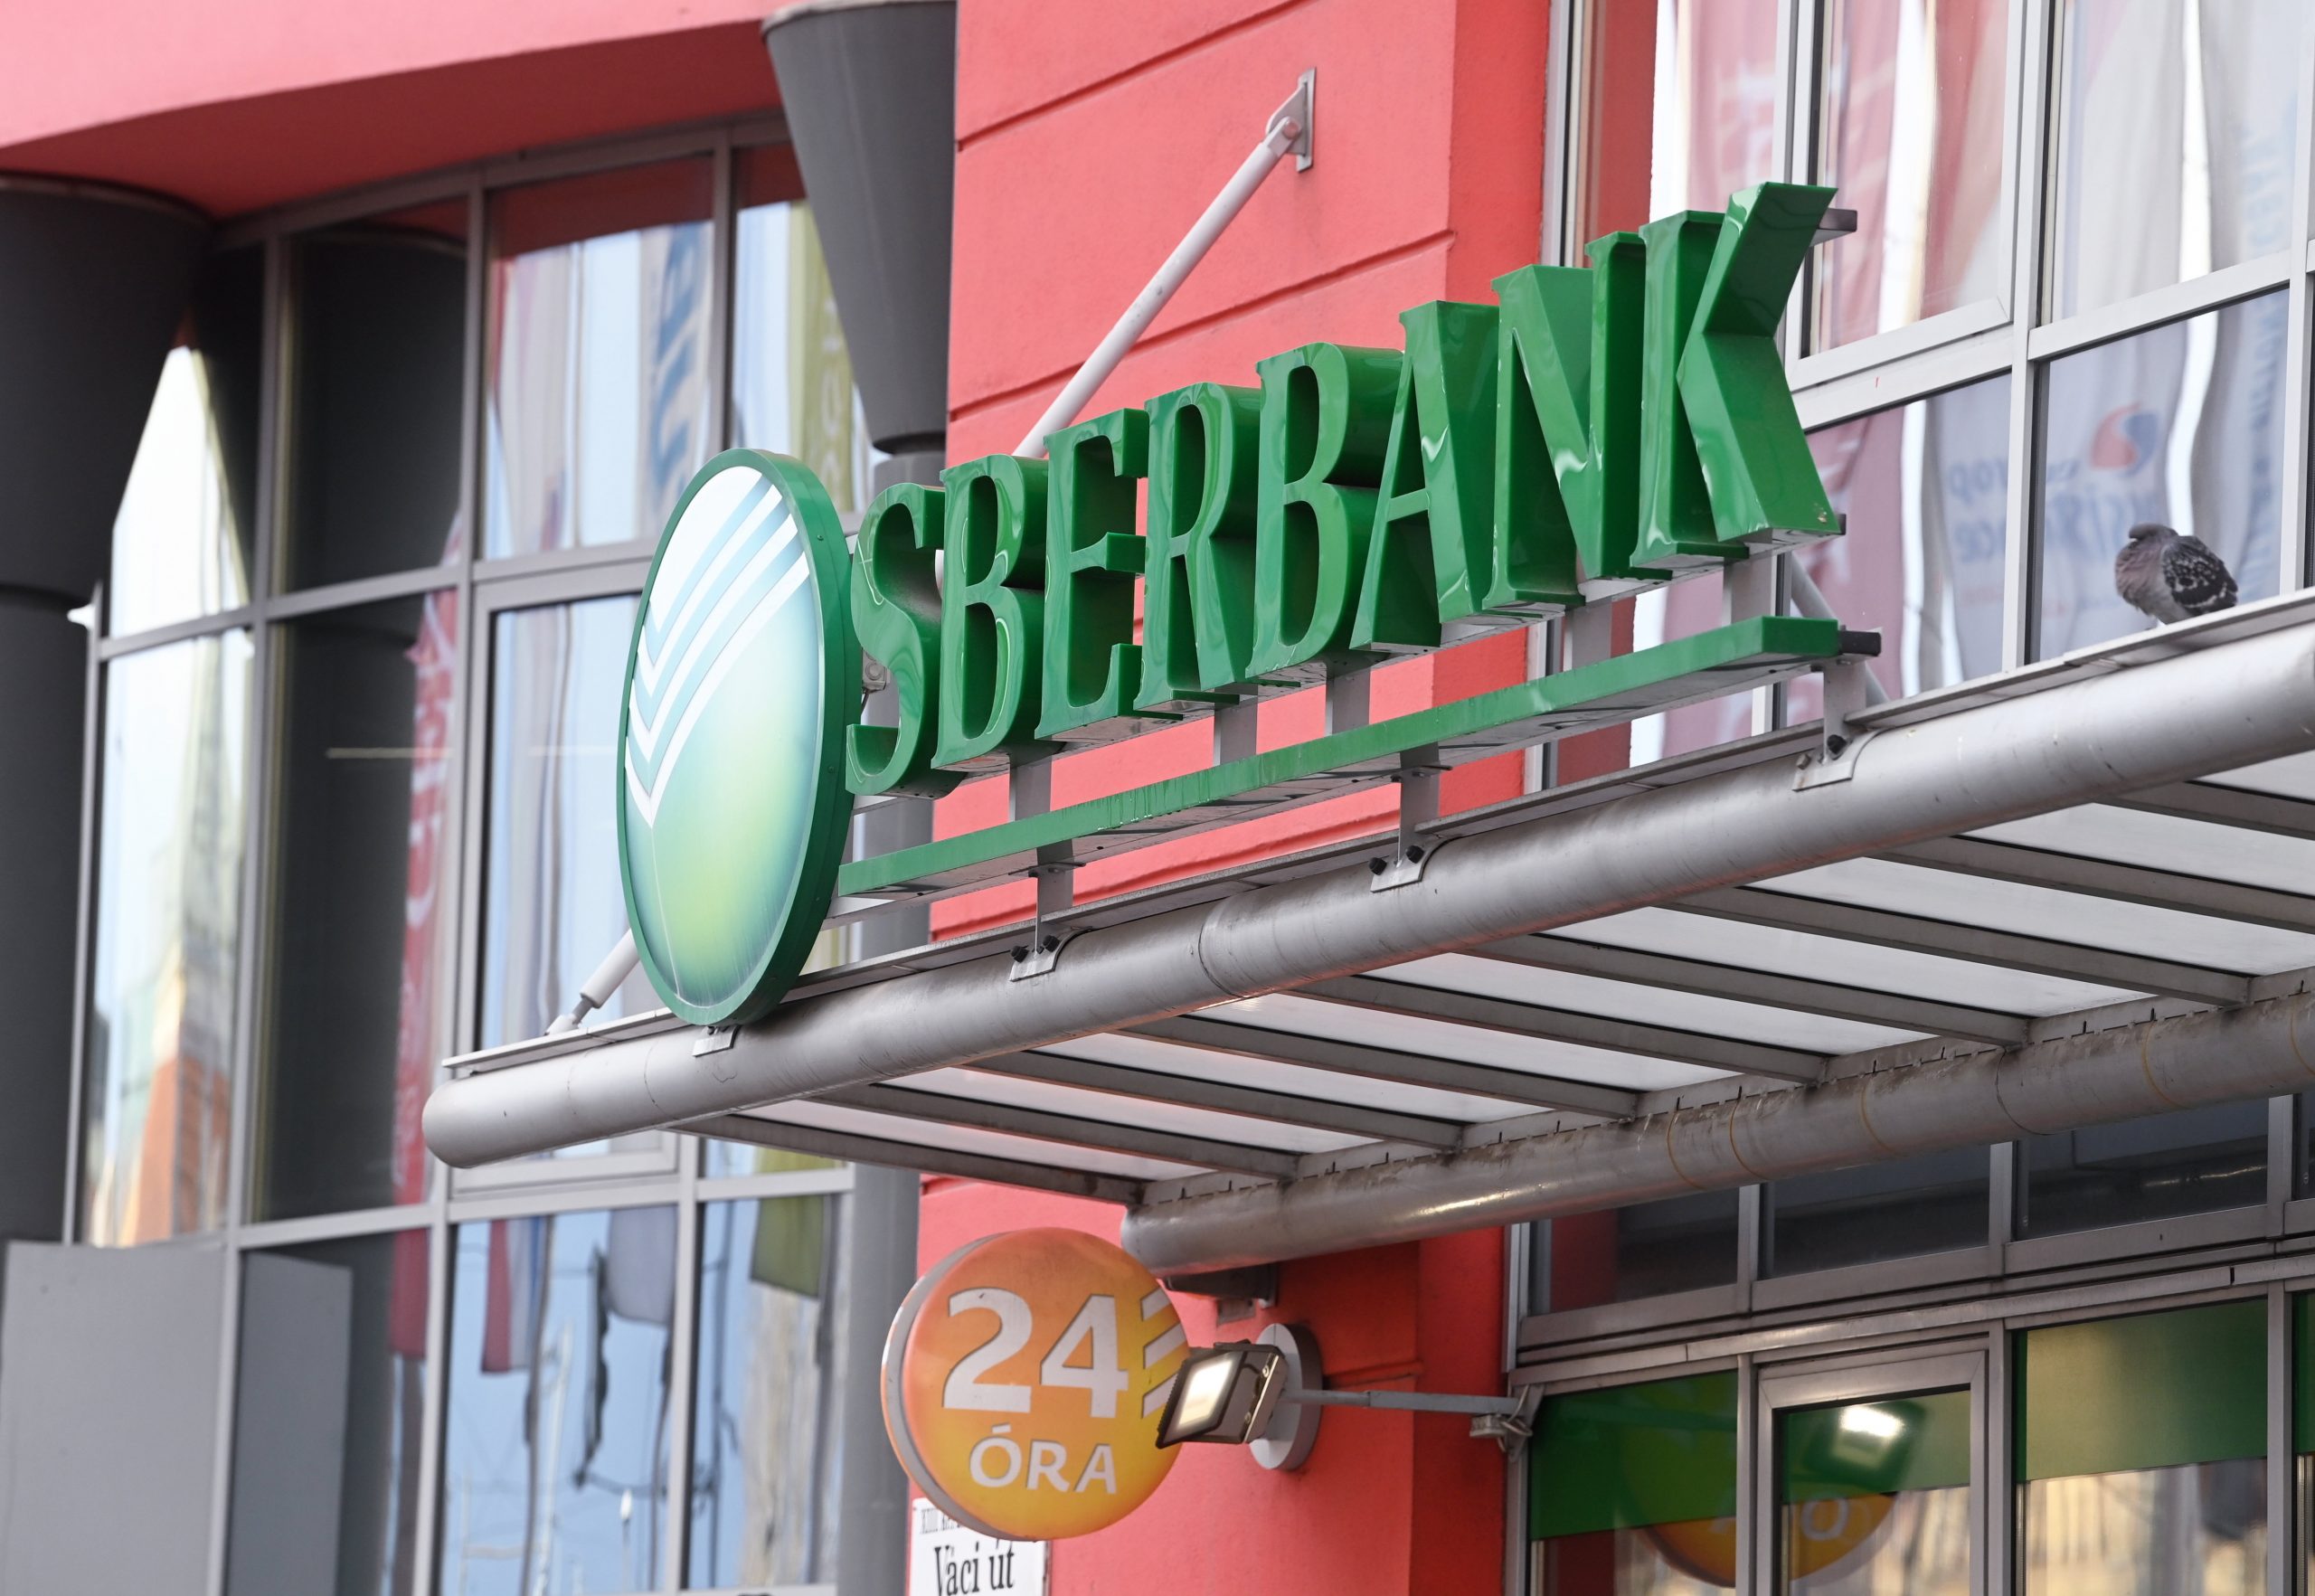 Central Bank Withdraws Sberbank Hungary Licence, Orders Lender Wound Up